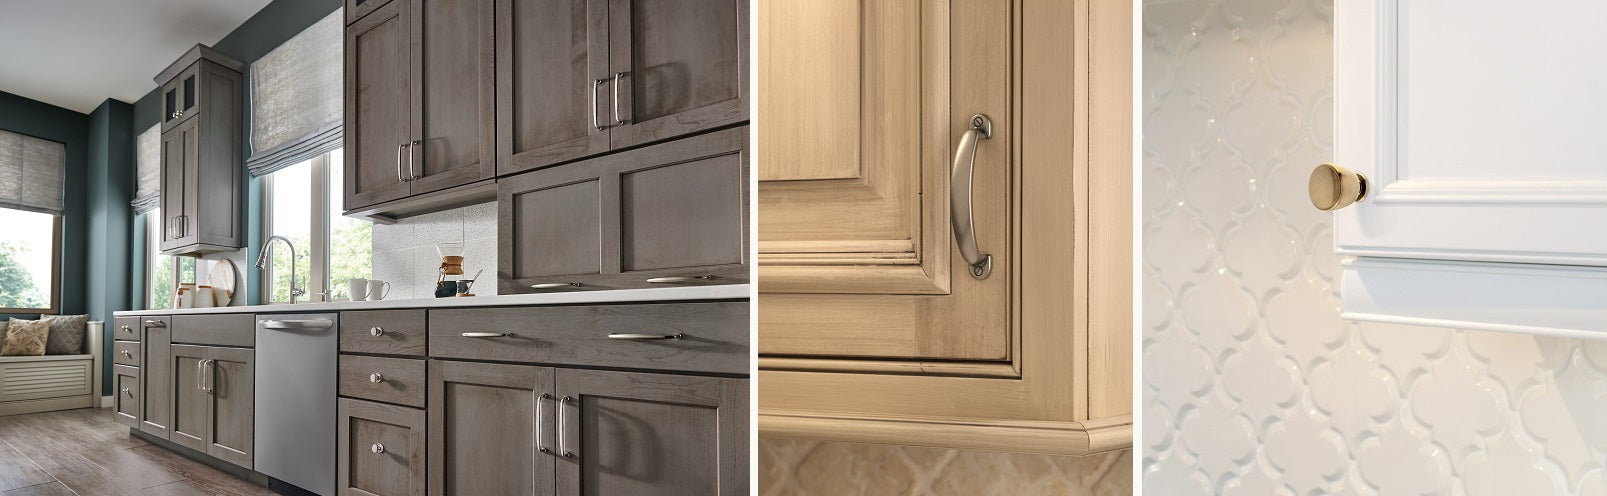 Placement for Cabinet Hardware